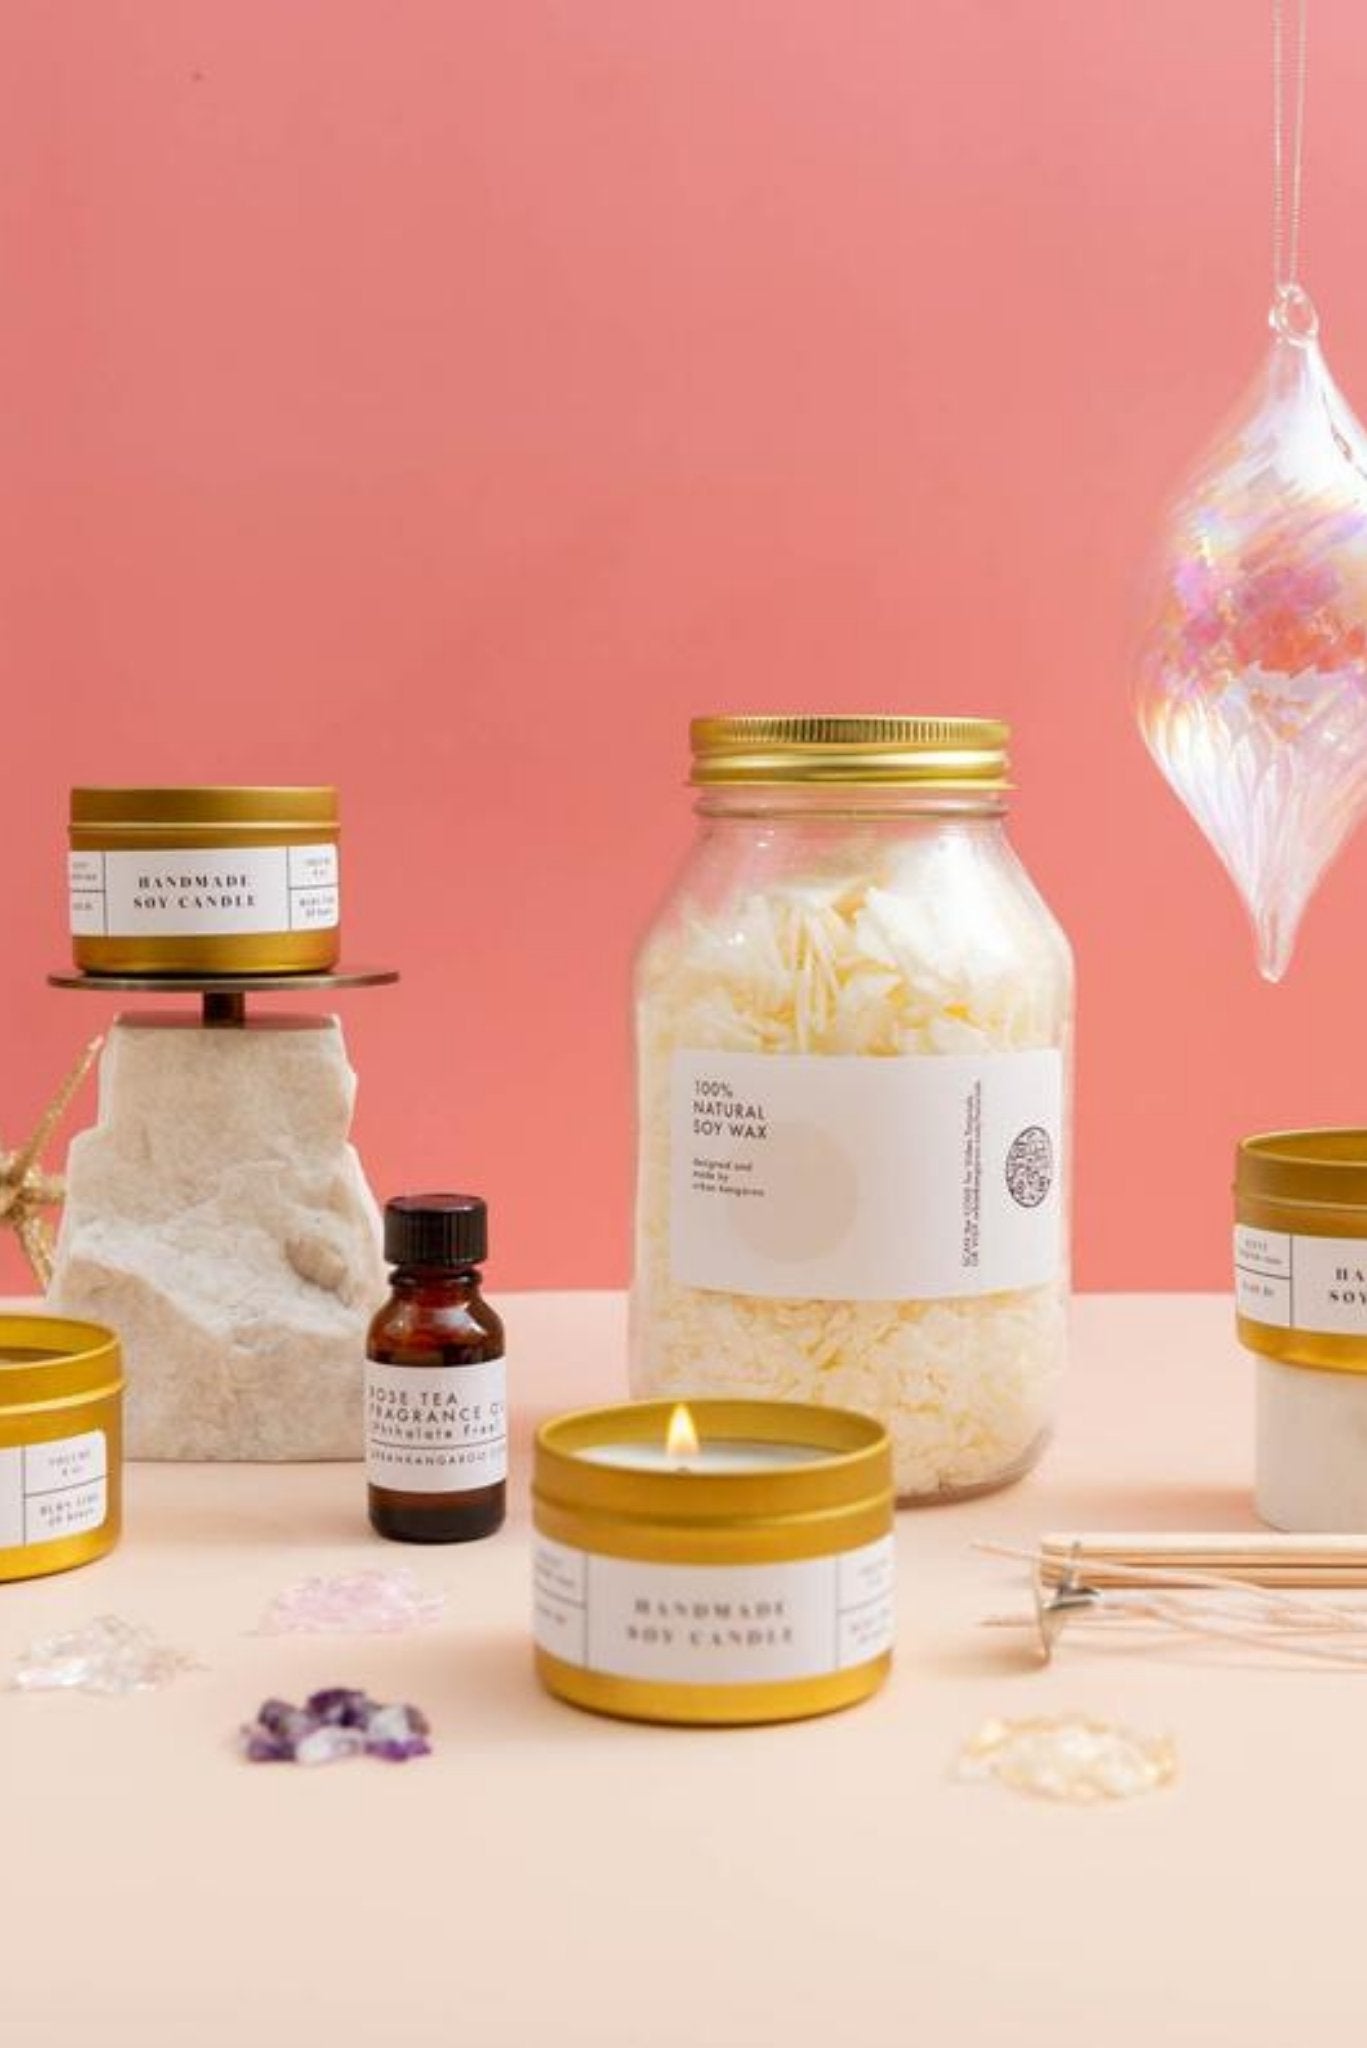 DIY: Make Your Own Candles! - Pretty Collected